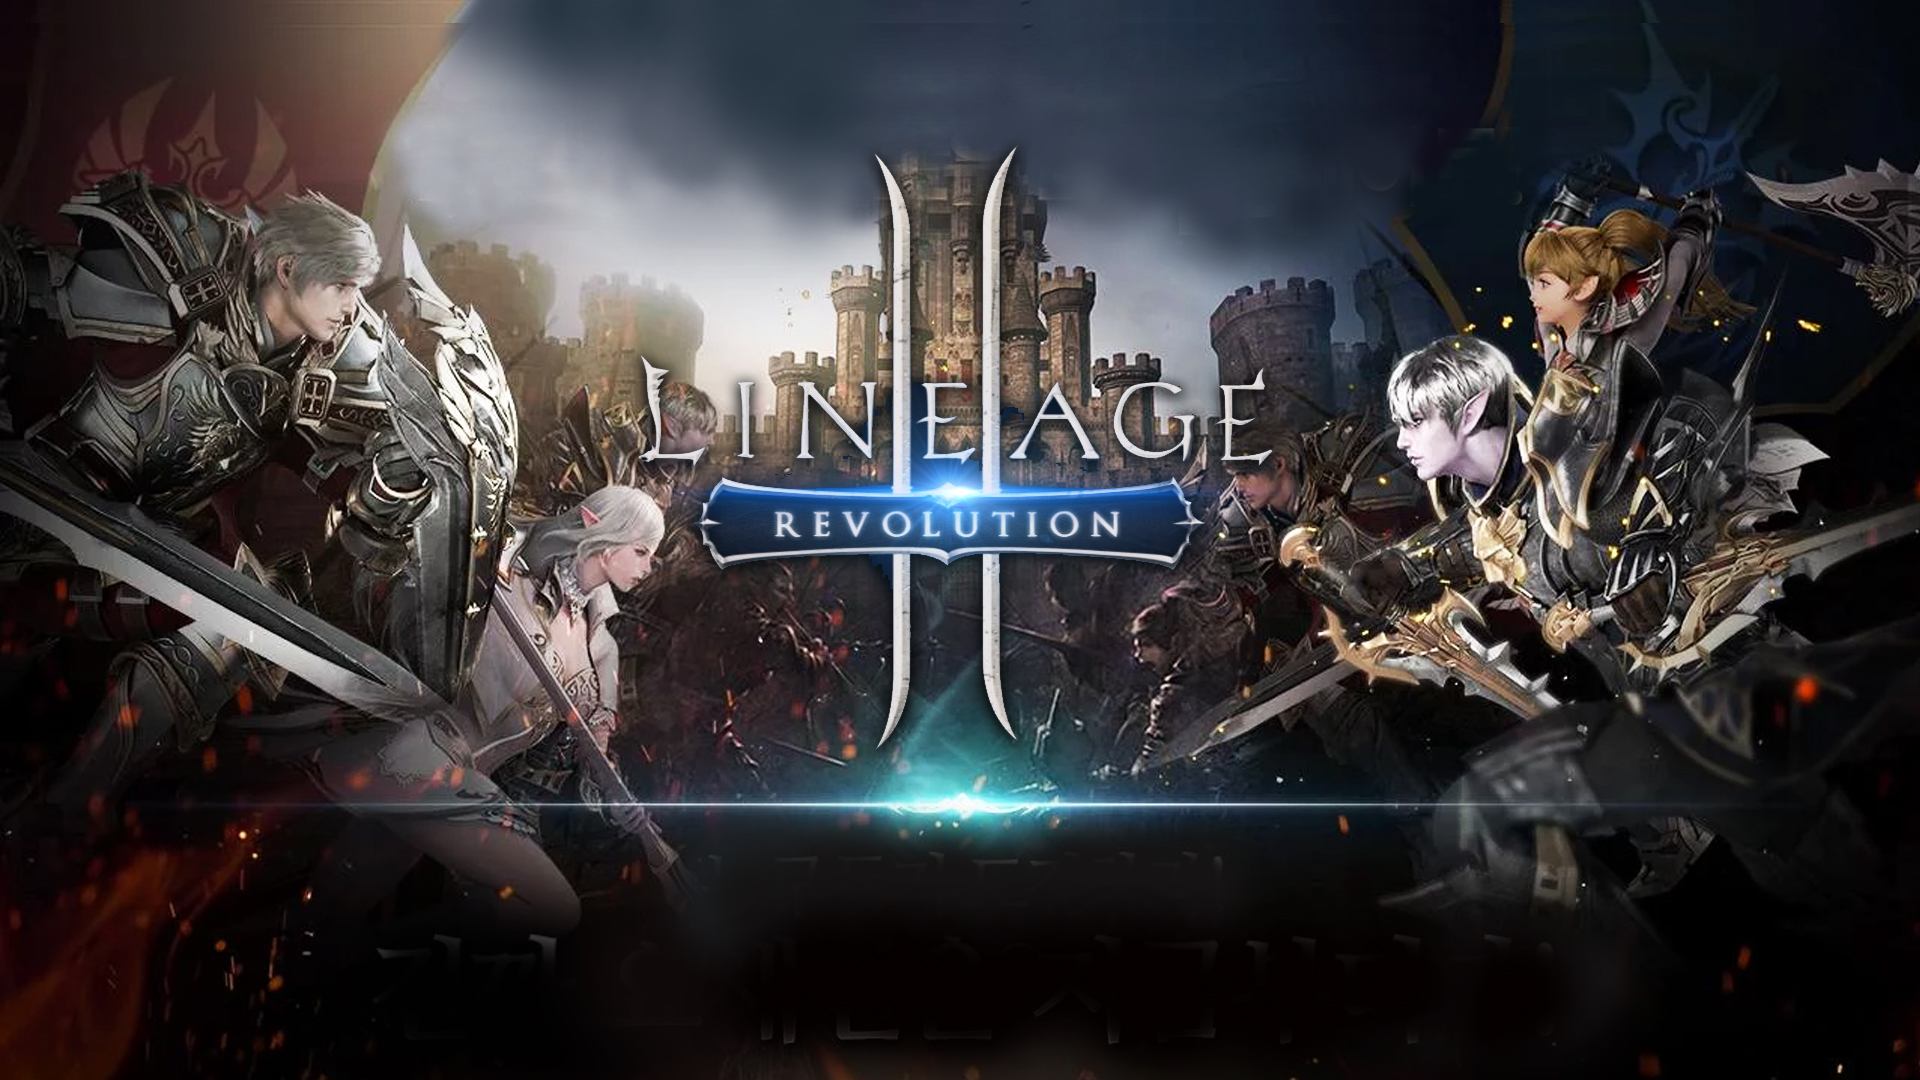 The best way to play Lineage 2 Revolution on PC